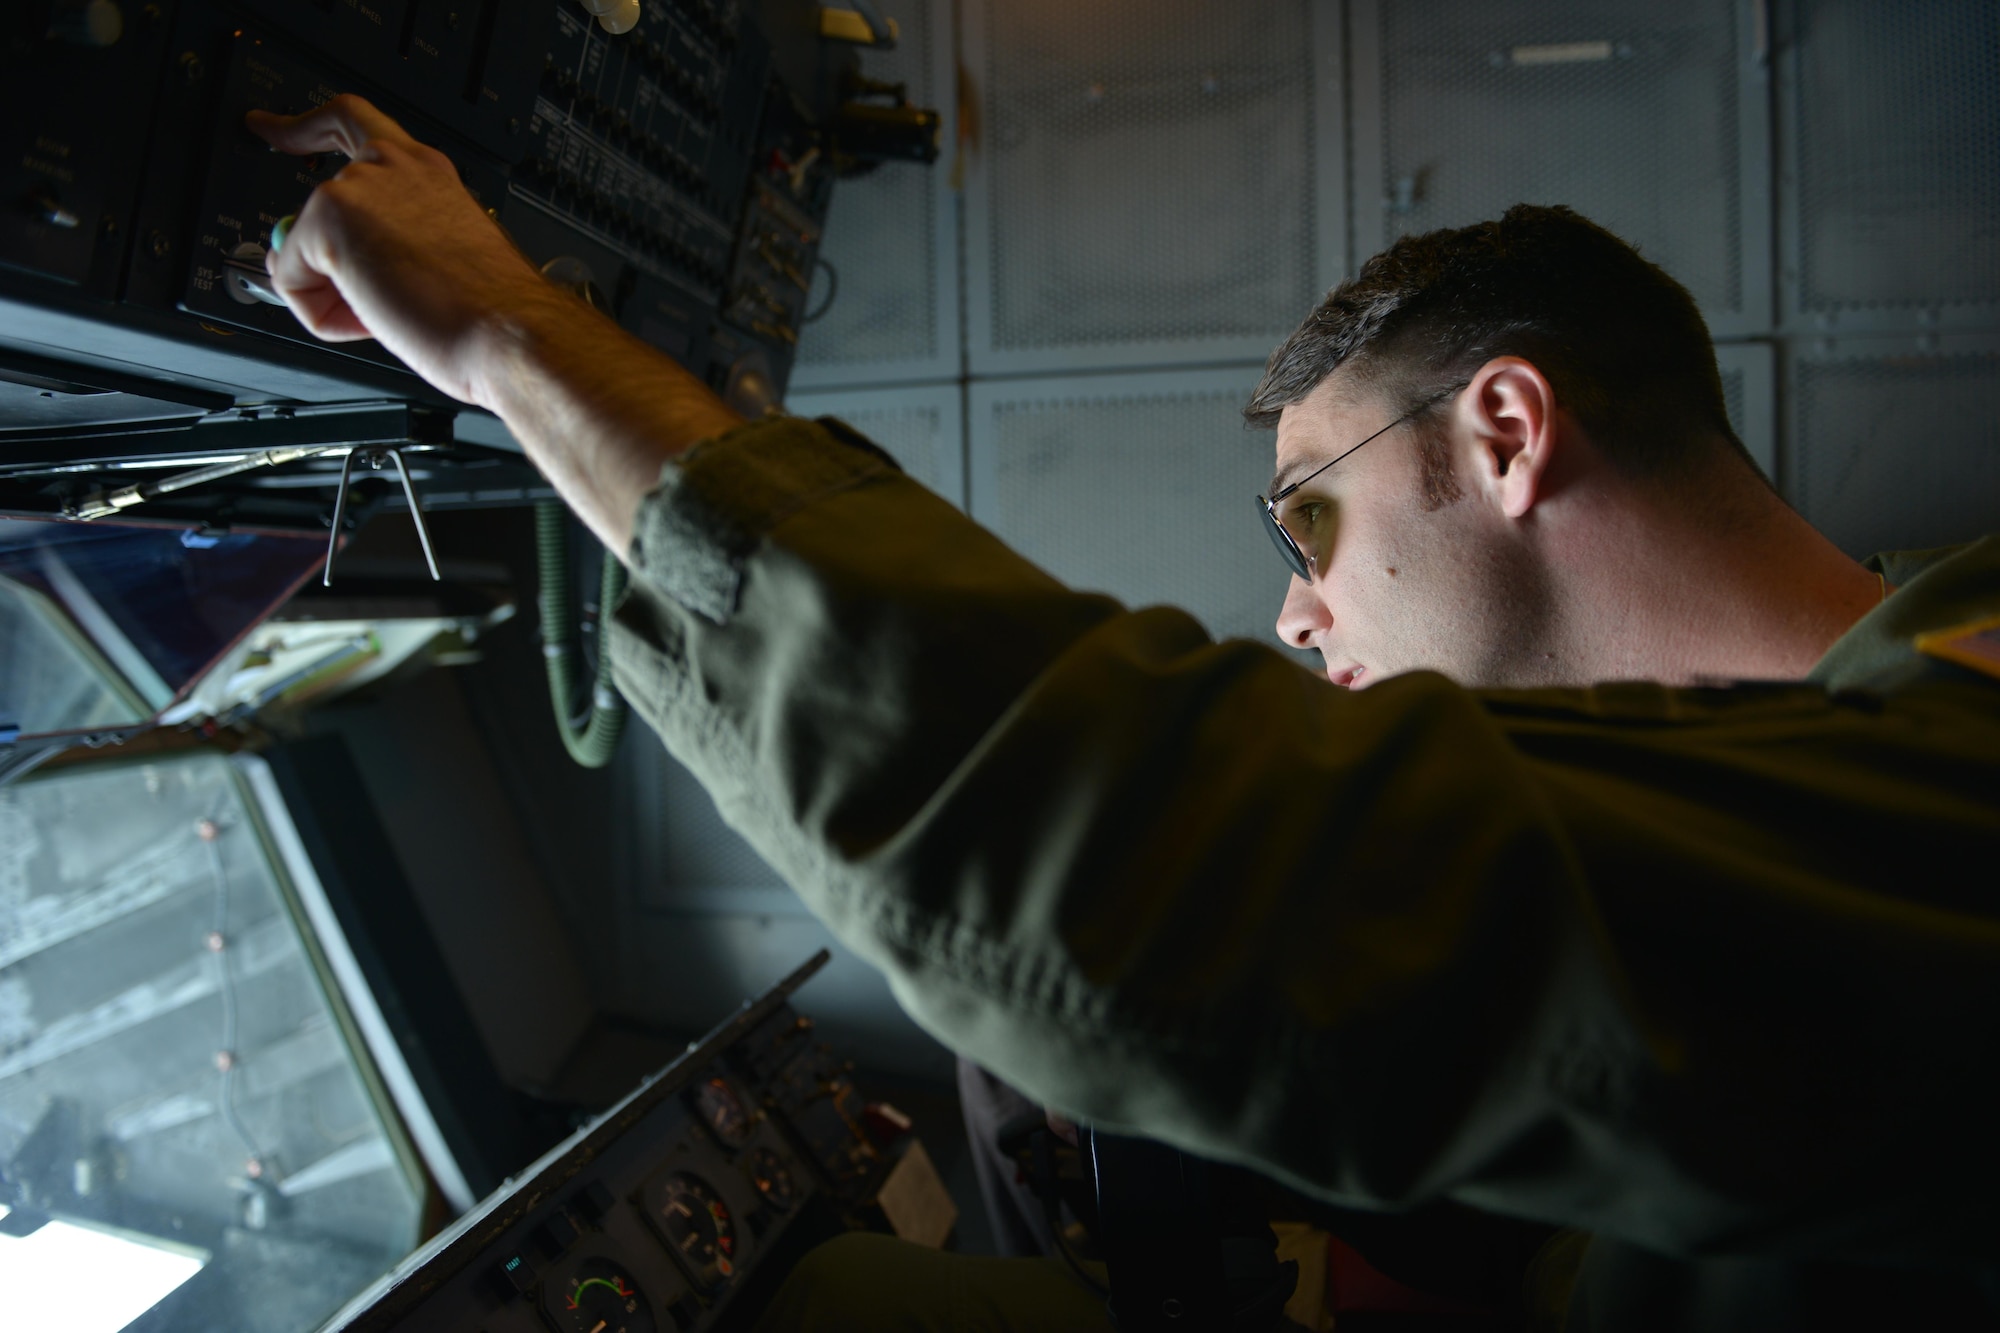 U.S. Air Force Senior Airman Erik Henry, 9th Air Refueling Squadron boom operator, refuels U.S. Air Force F-35A Lightning IIs from a KC-10 Extender over the Atlantic Ocean June 30, 2016. The F-35s traveled to Fairford, England, to support and perform in the Air Combat Command Heritage Flight for the Royal International Air Tattoo. (U.S. Air Force photo by Staff Sgt. Natasha Stannard)